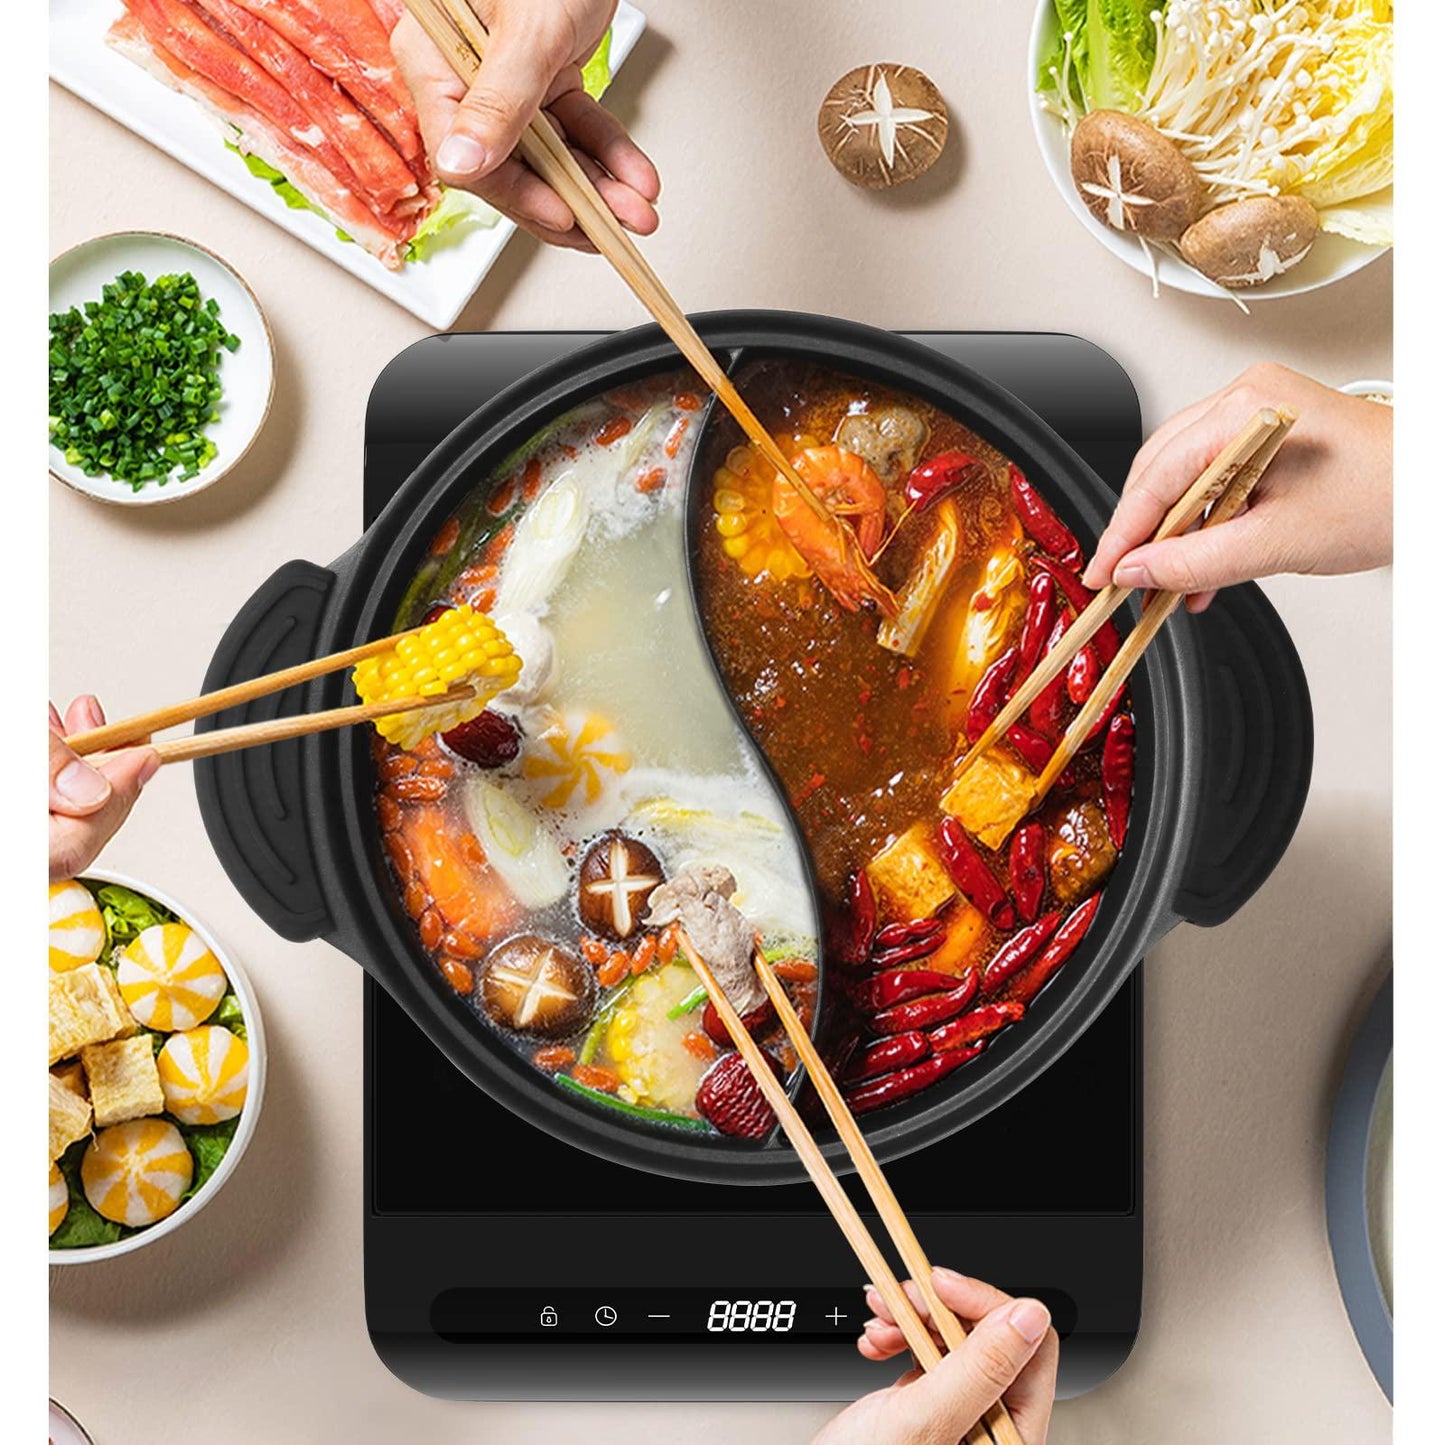 Kerykwan 304 Stainless Steel Shabu Shabu Hot pot with Divider Induction Cooktop Countertop Burner - CookCave